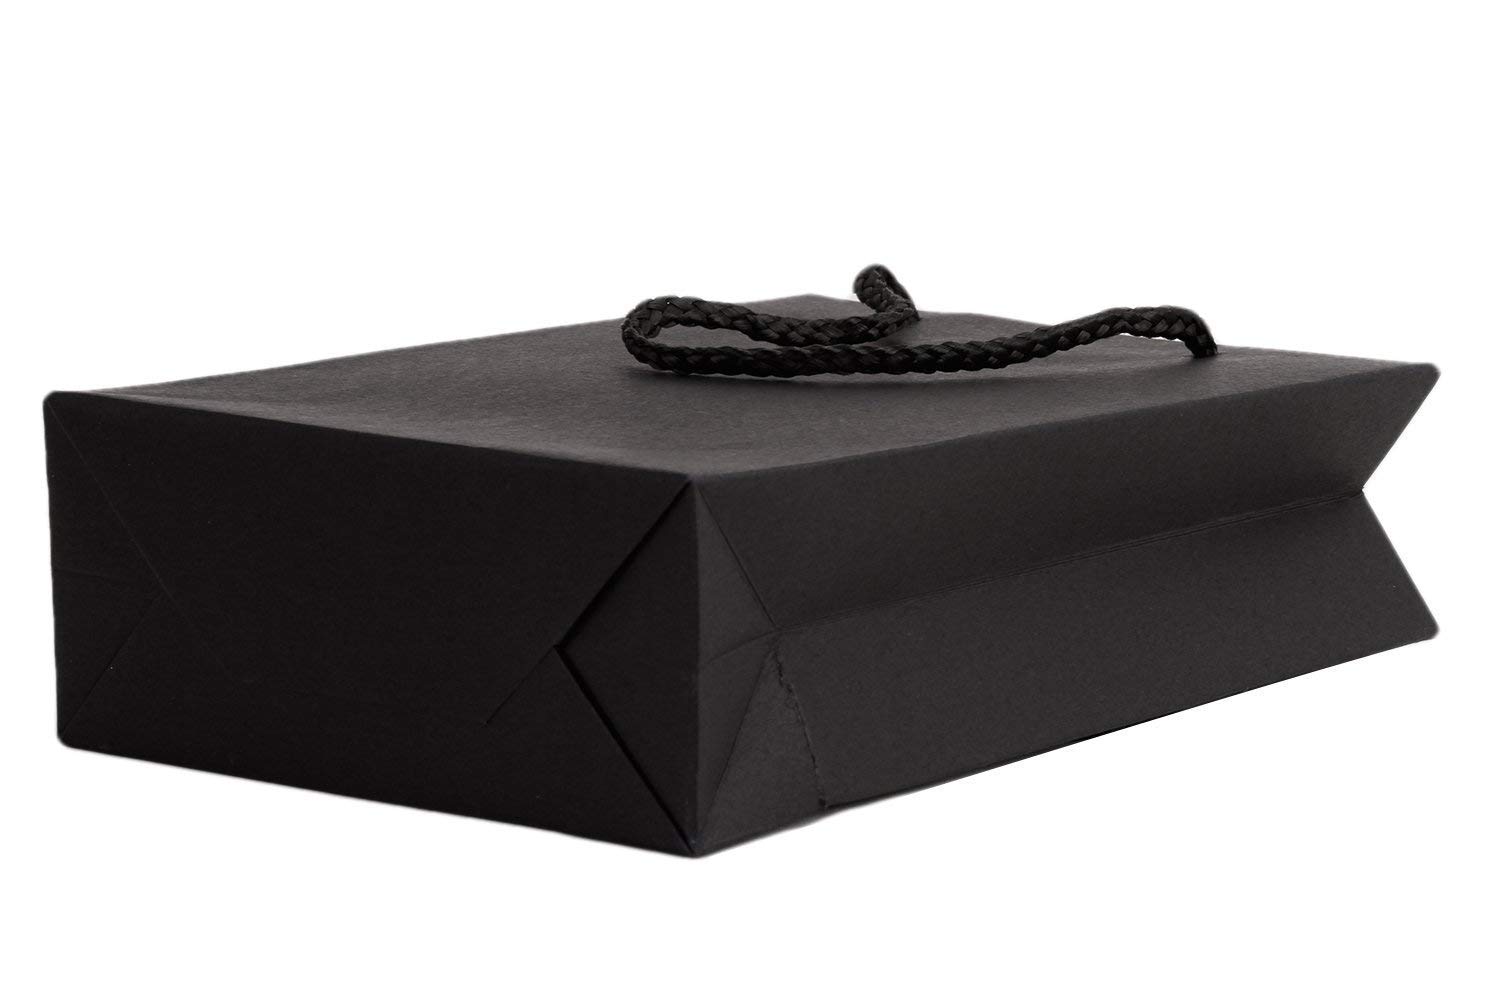 Strong dori handle attached with this black color paper bag